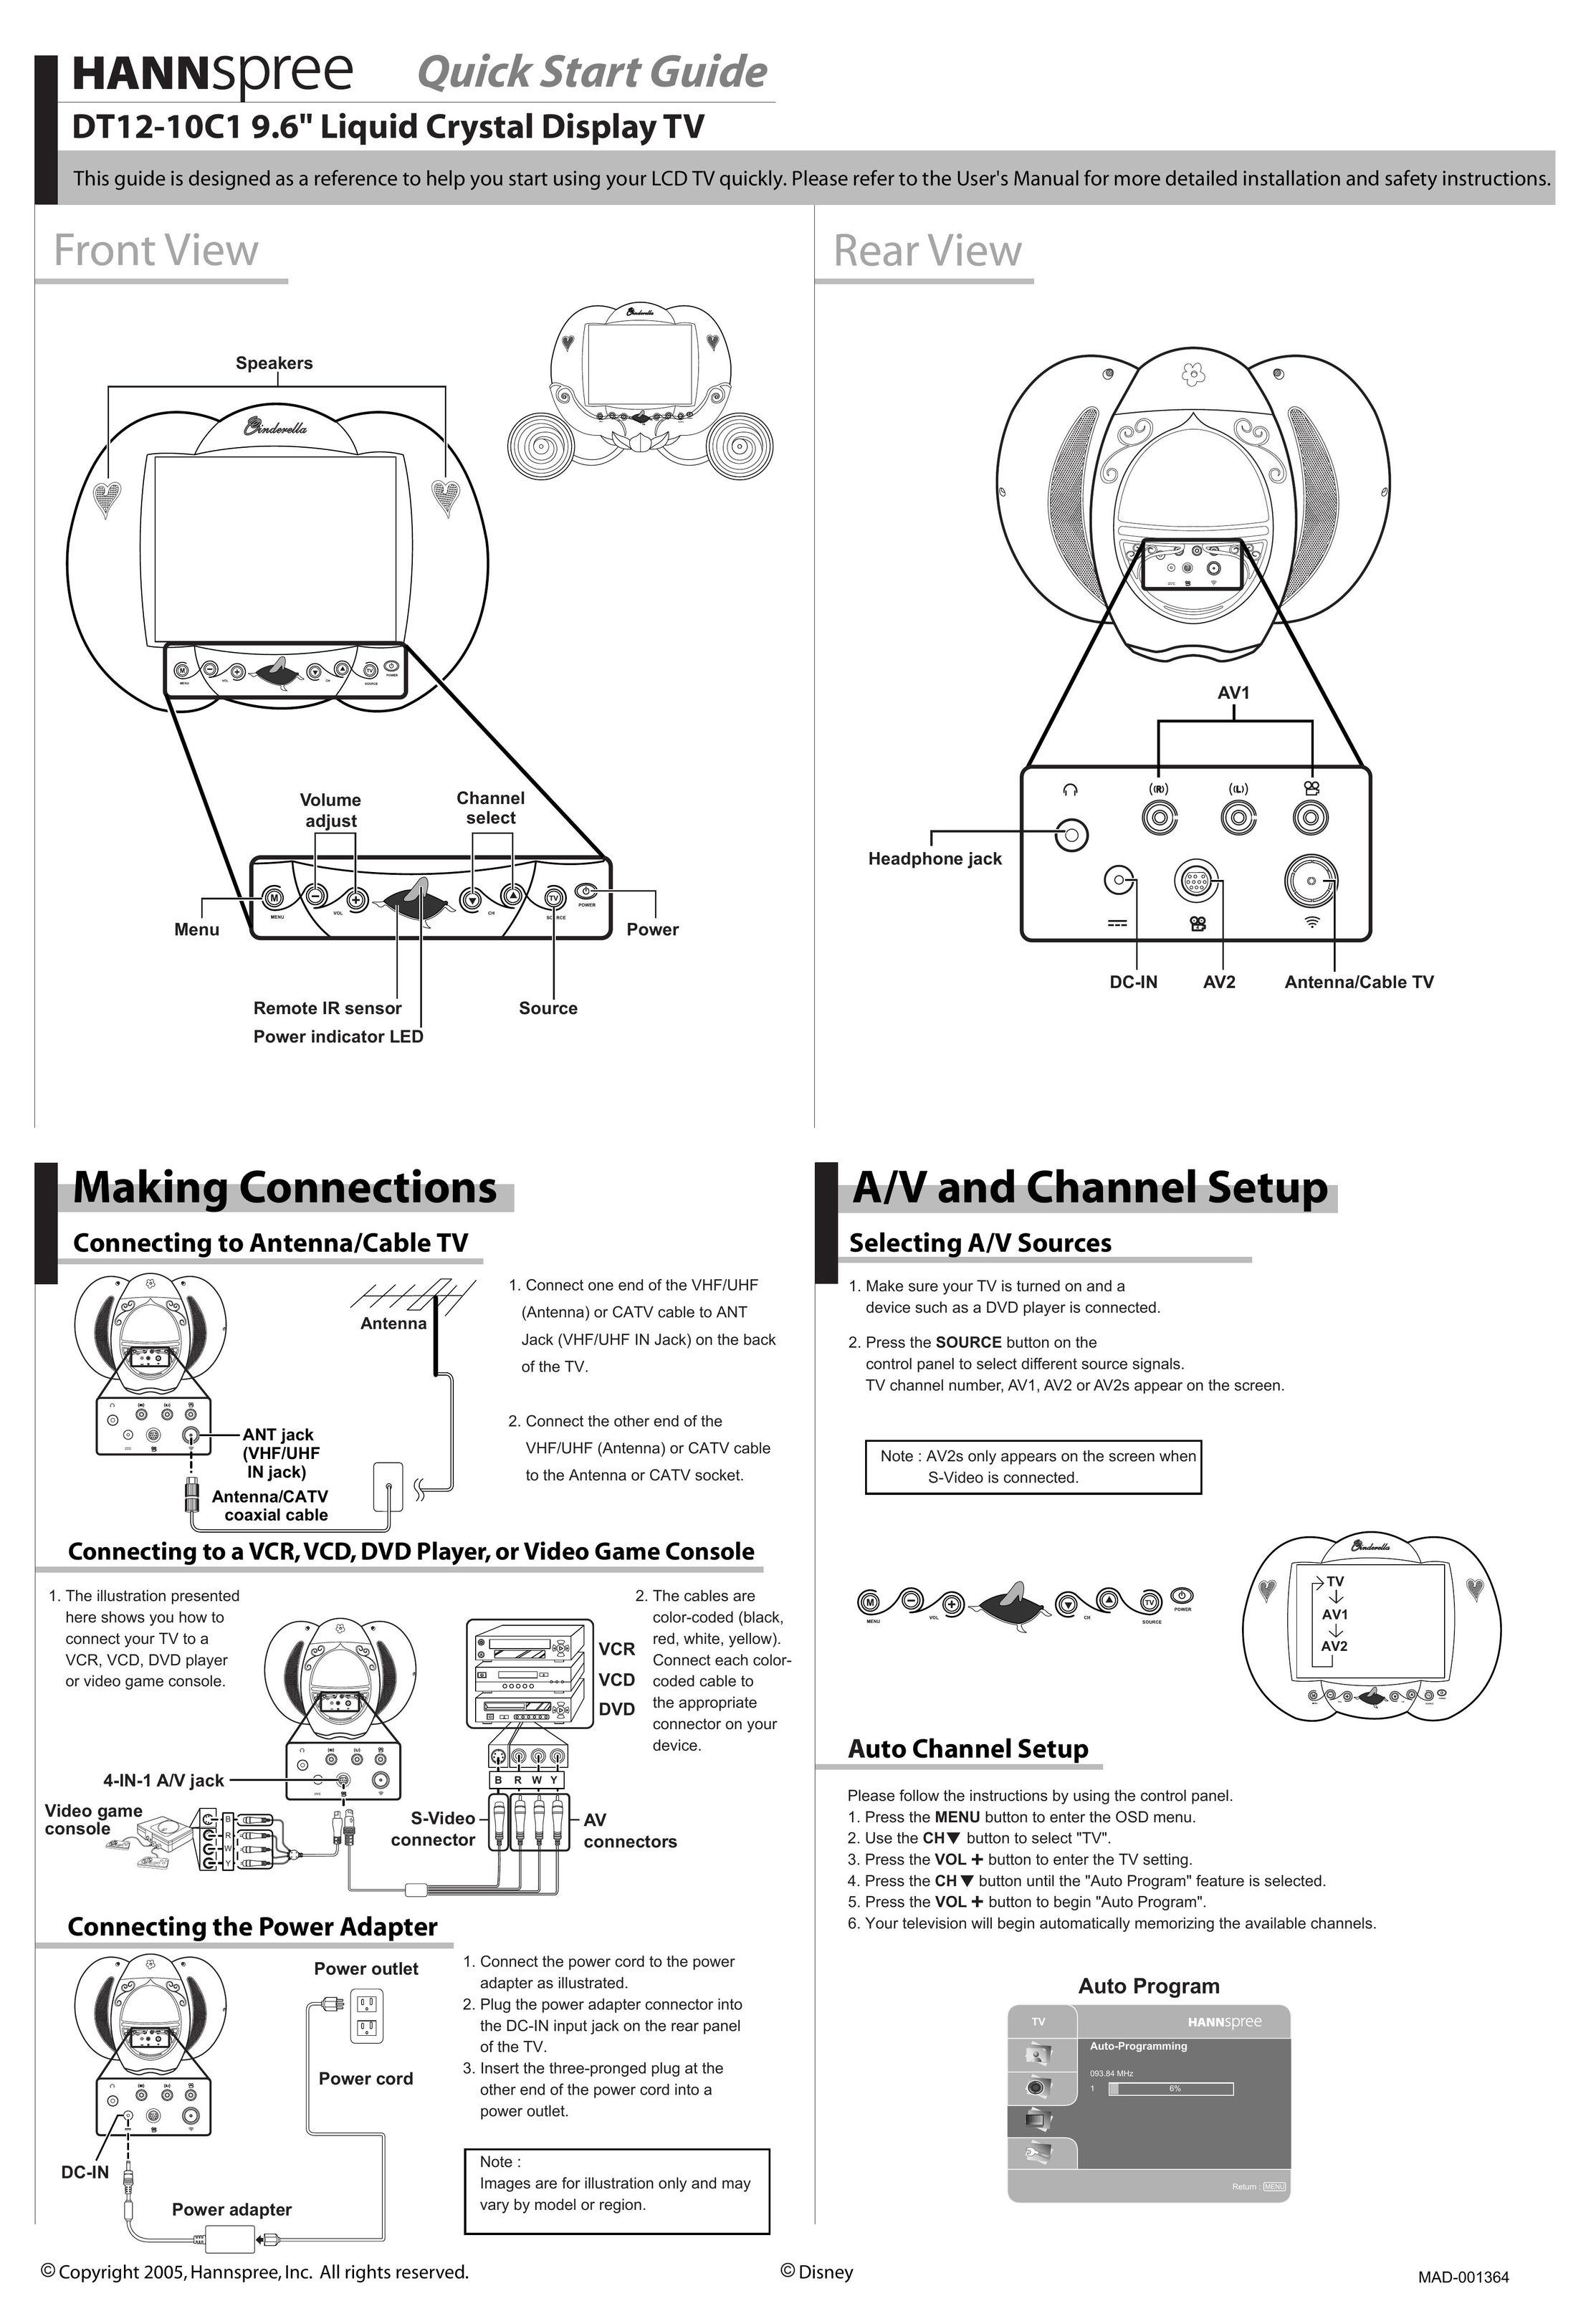 HANNspree DT12-10C1 Flat Panel Television User Manual